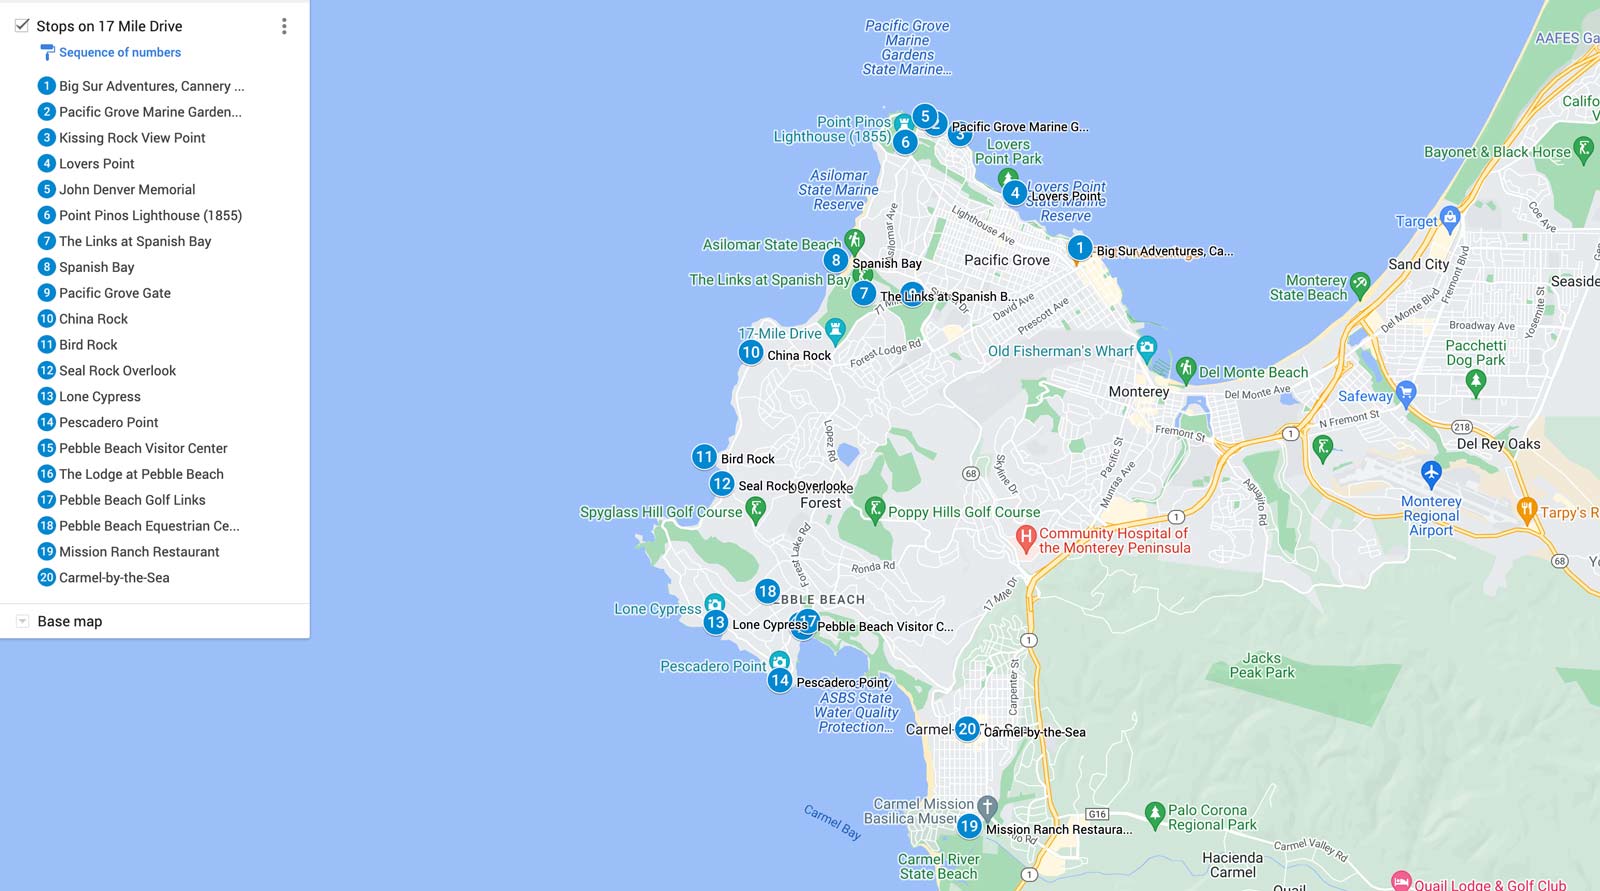 map of 17 mile drive stops